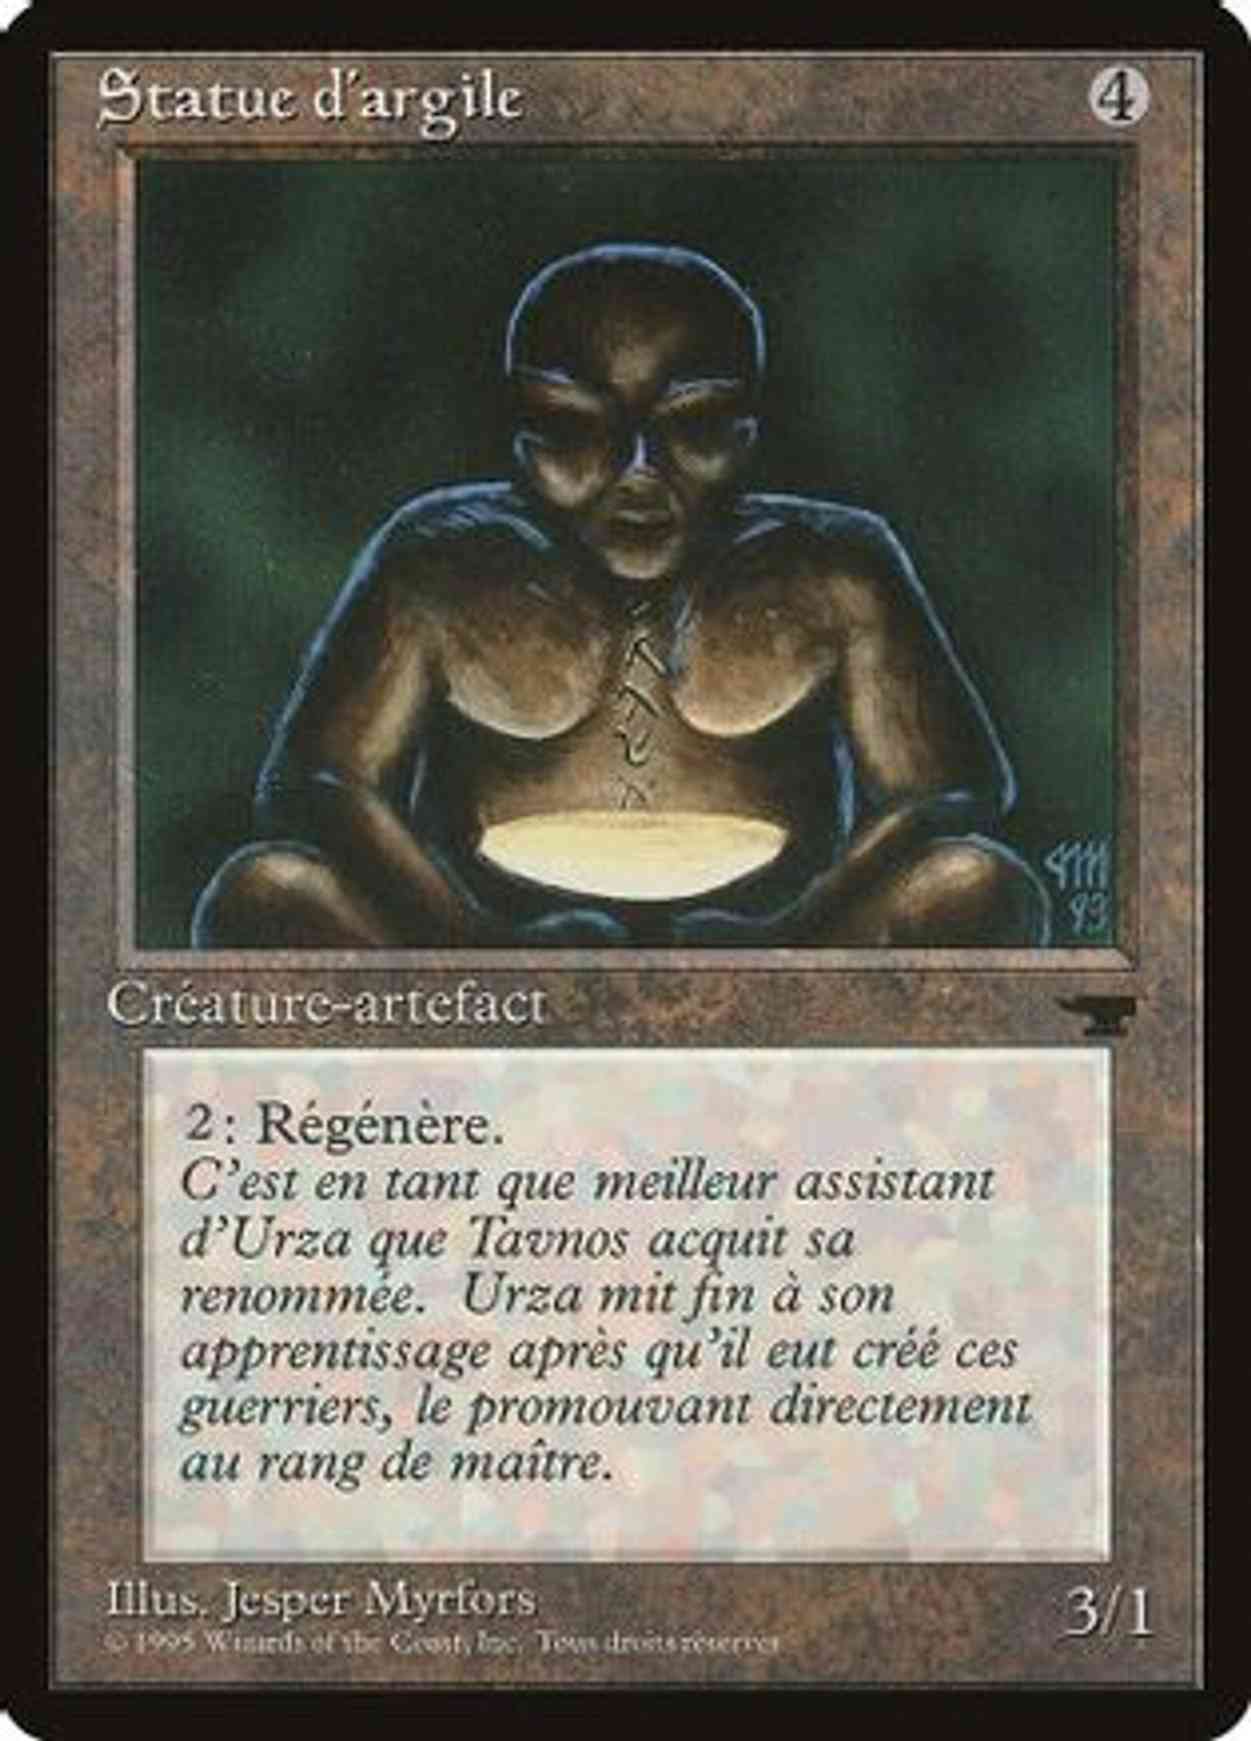 Clay Statue (French) - "Statue d'argile" magic card front